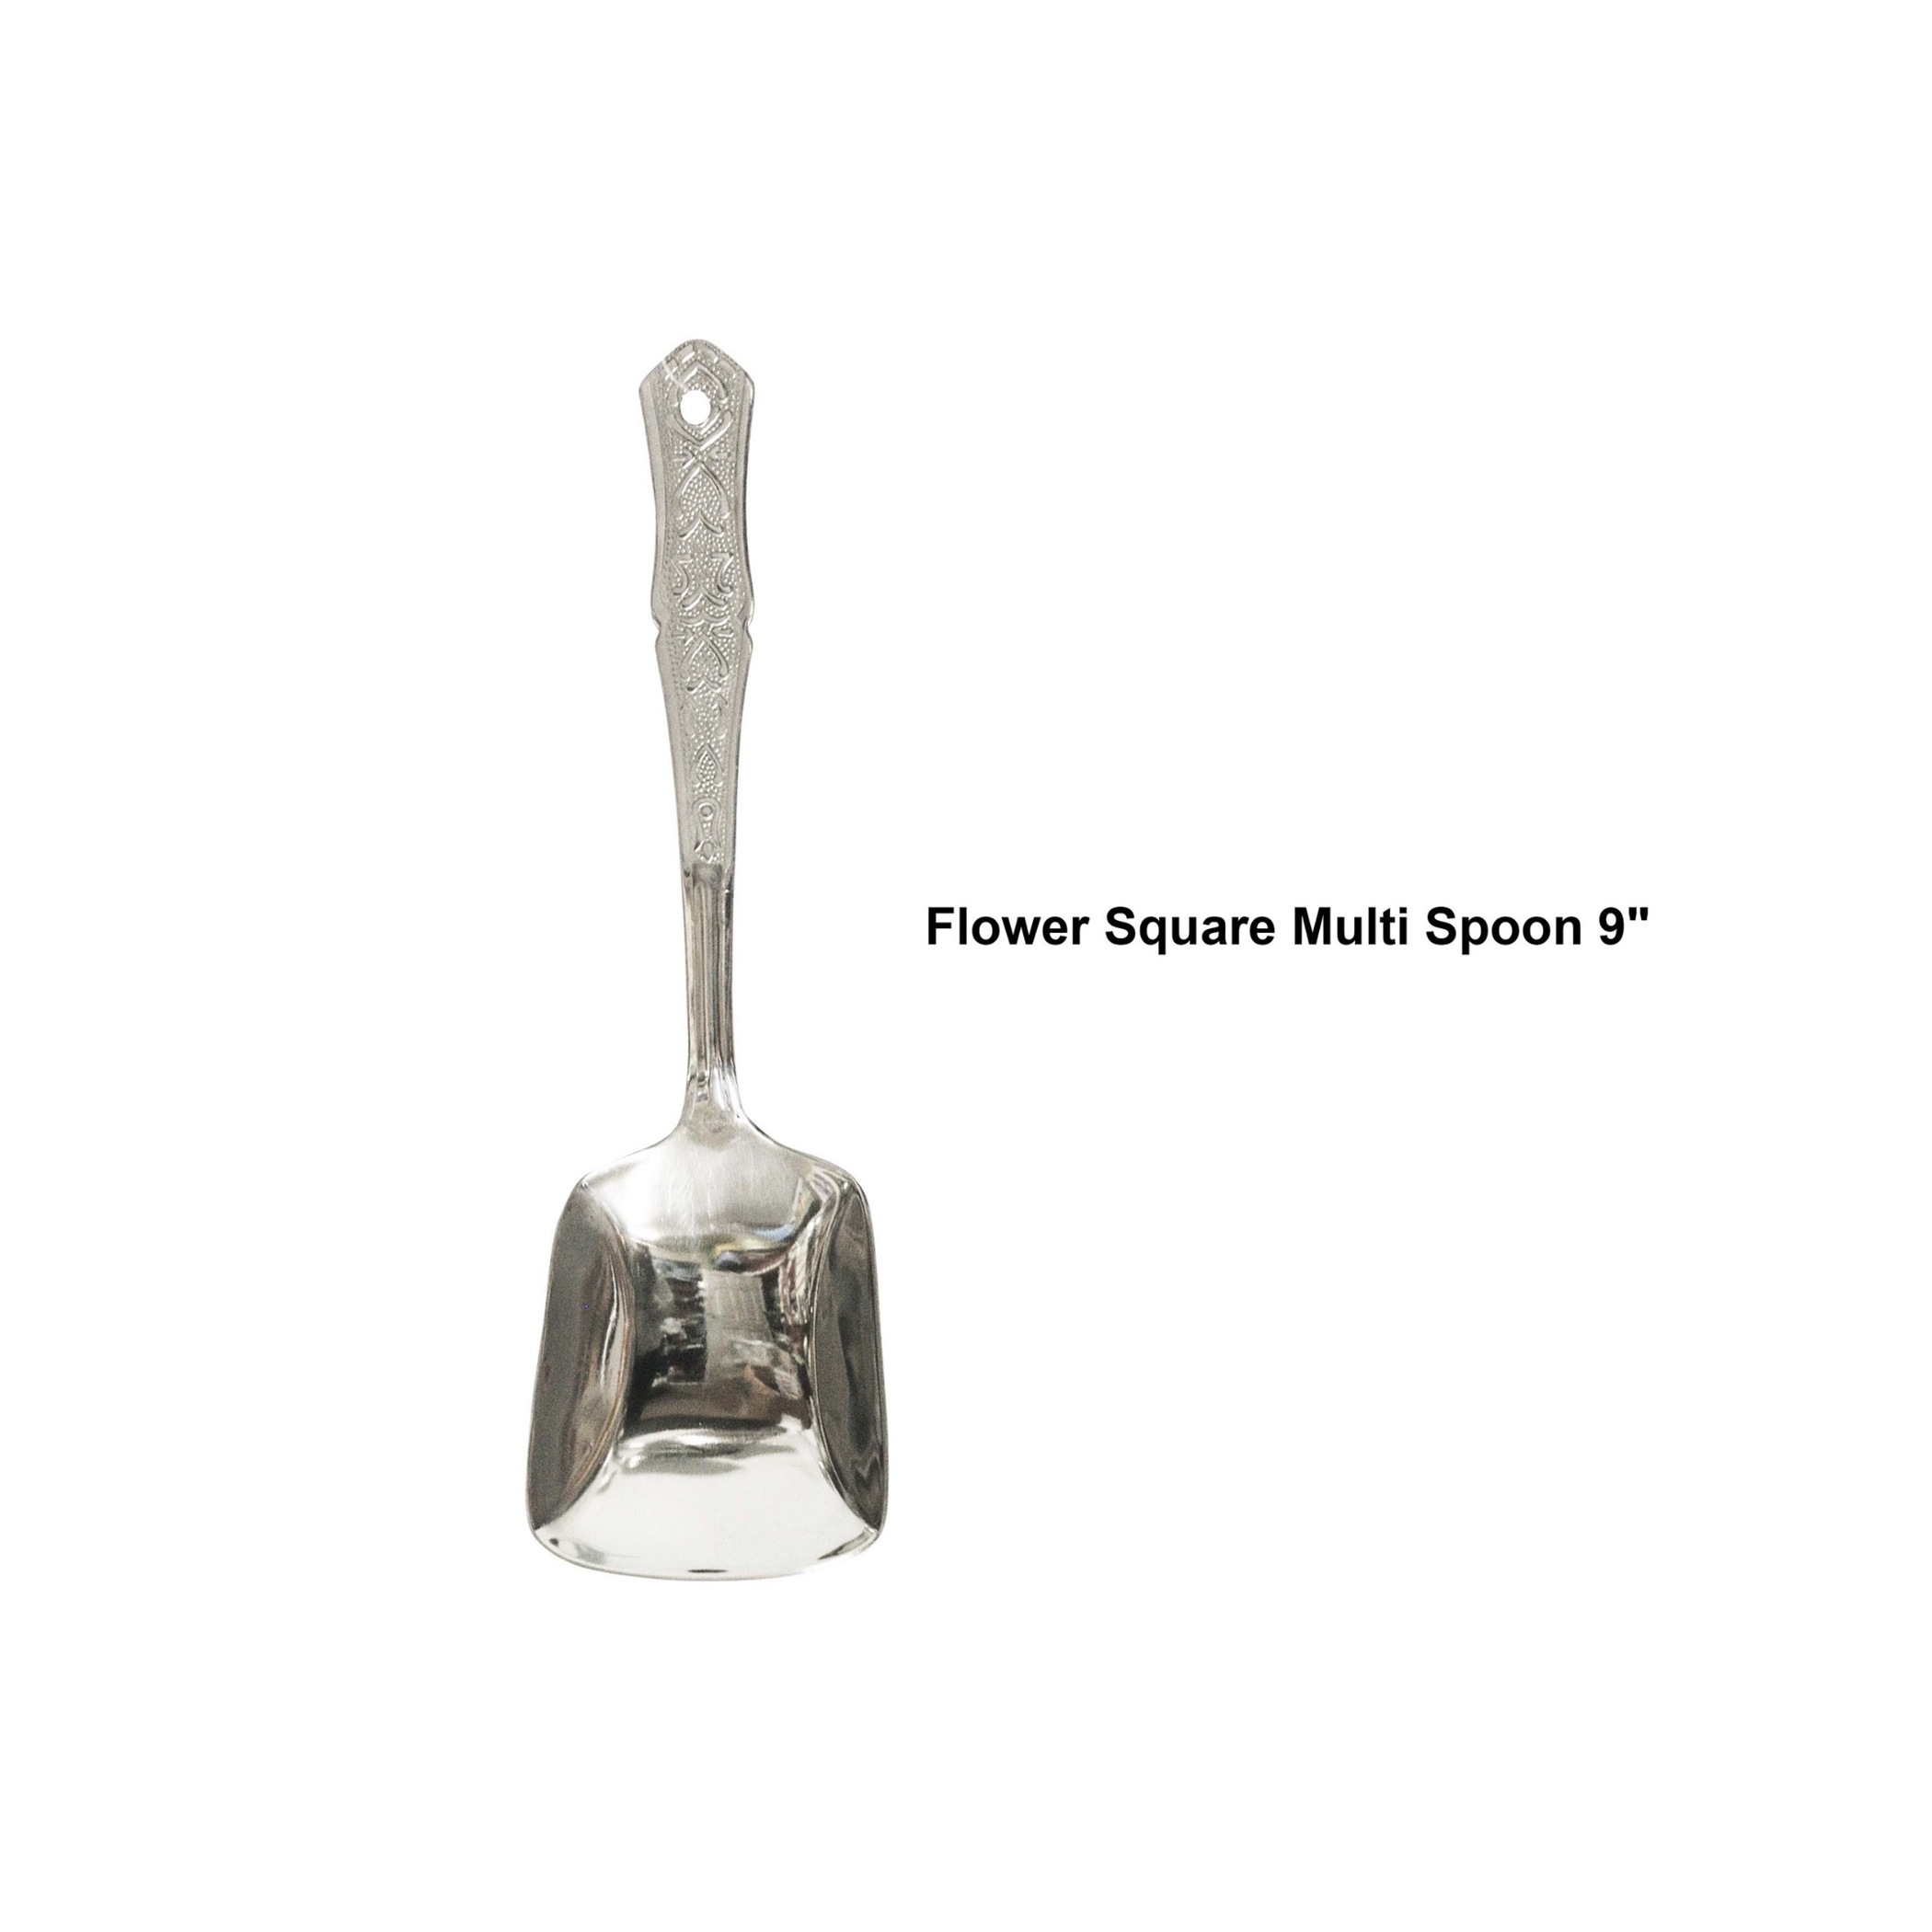 Stainless Steel Flower Square Multi Spoon 9 - Inches